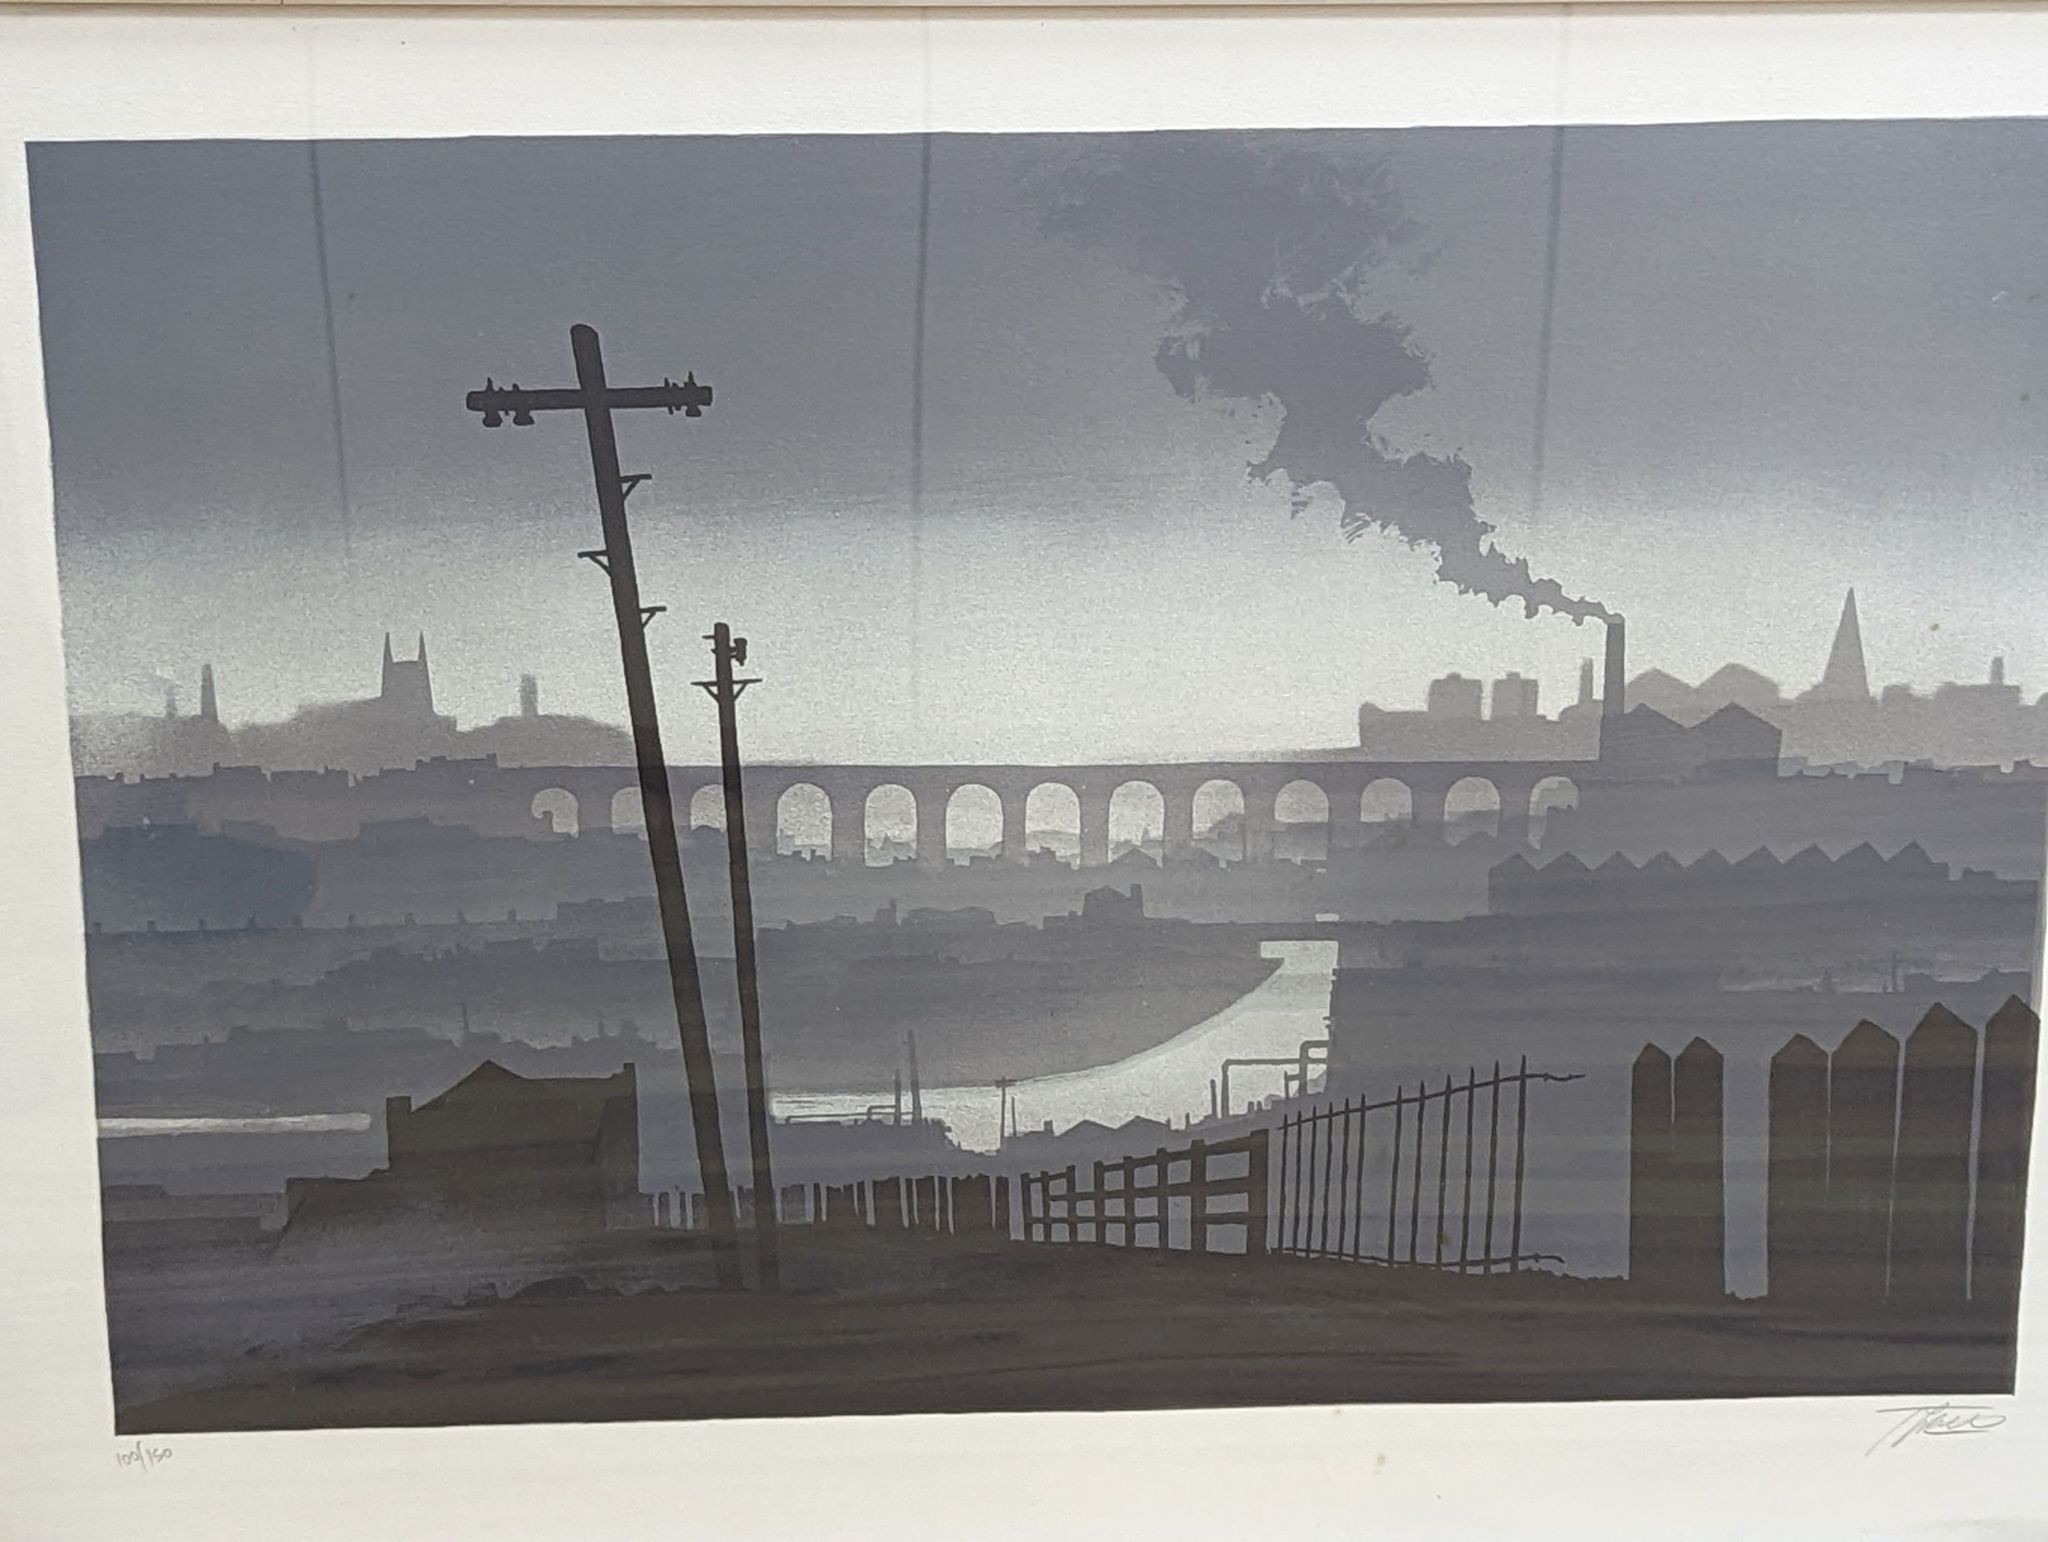 Trevor Grimshaw, lithograph, The Viaduct, signed 100/150, 44 x 66cm, a charcoal drawing of Leda and the swan by Julie Held and an unsigned watercolour landscape